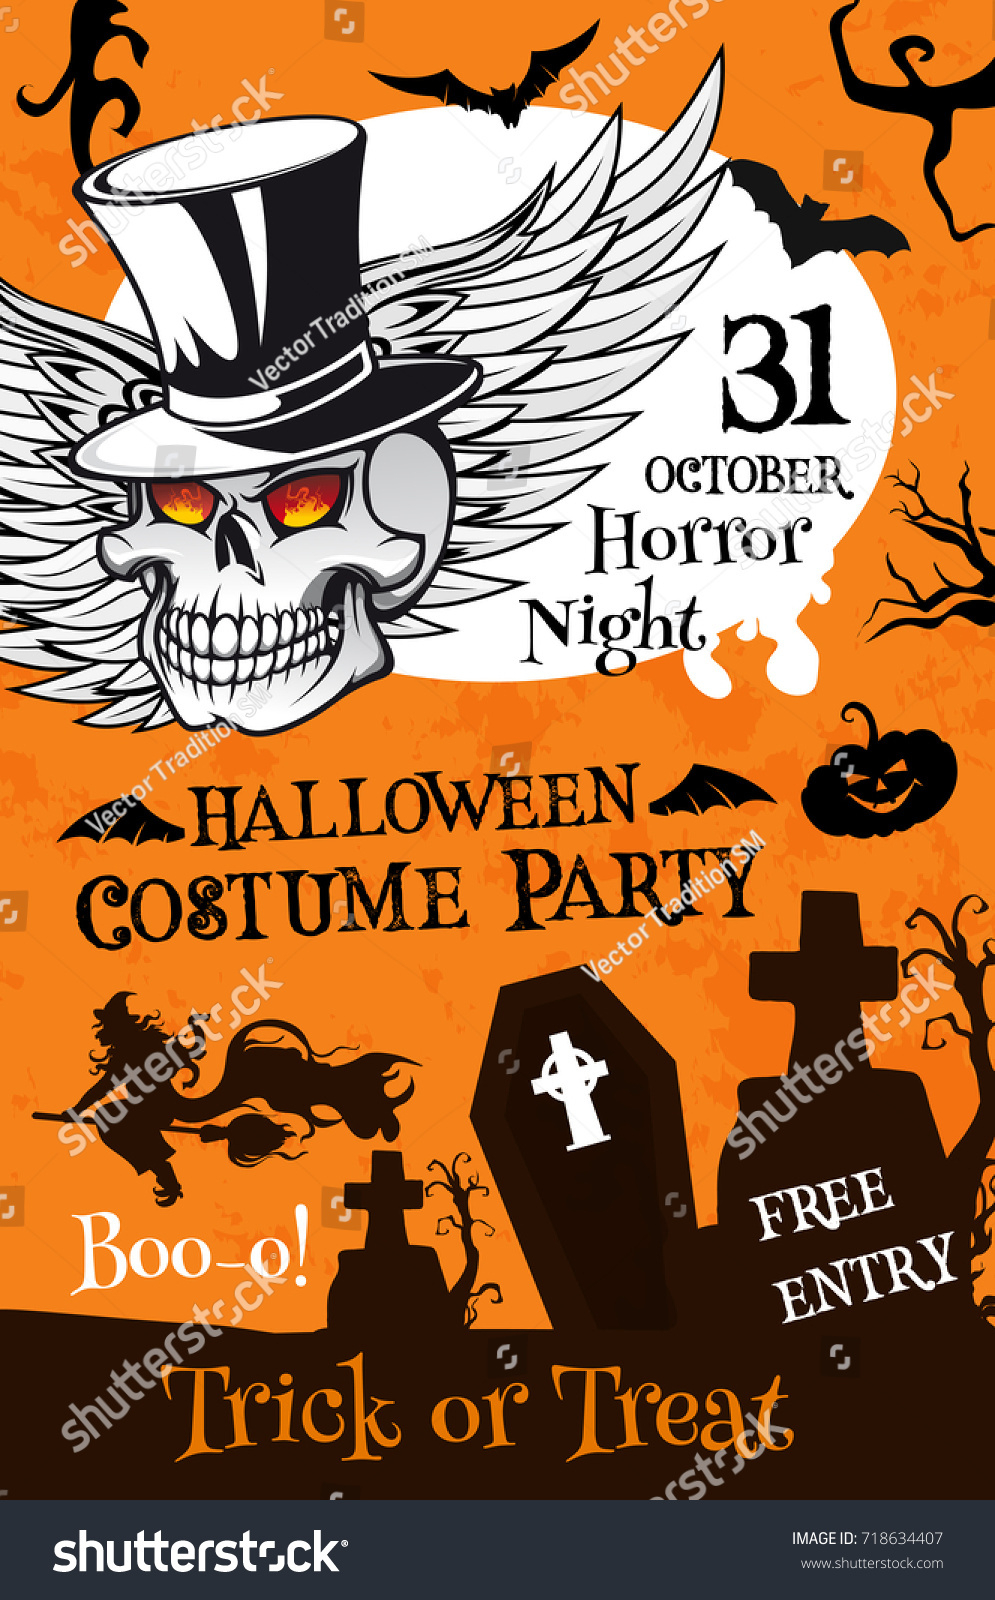 Halloween Costume Party Poster Template Holiday Stock Vector Pertaining To Halloween Costume Party Flyer Templates